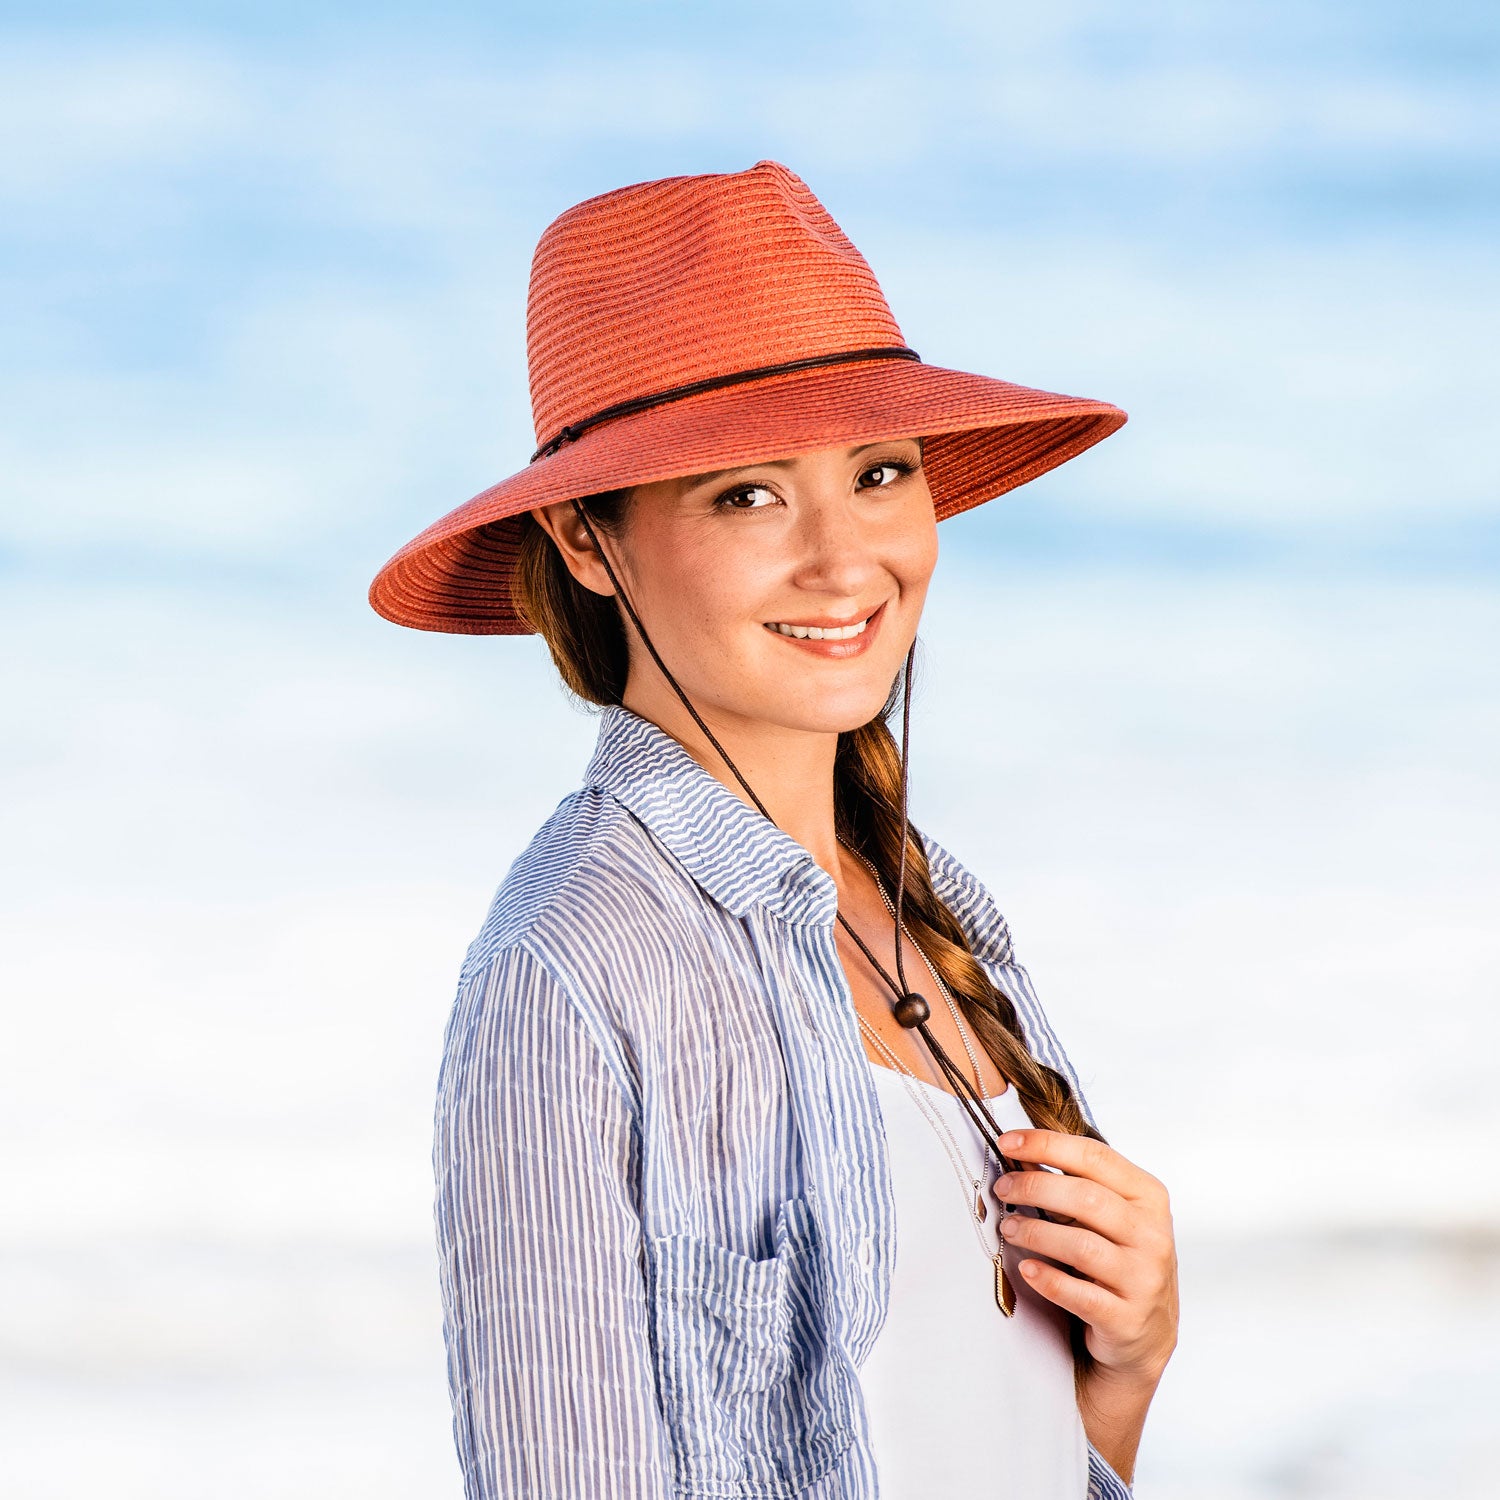 Woman Wearing a Wallaroo Petite Sanibel Summer Sun Hat with uv protection while on the beach